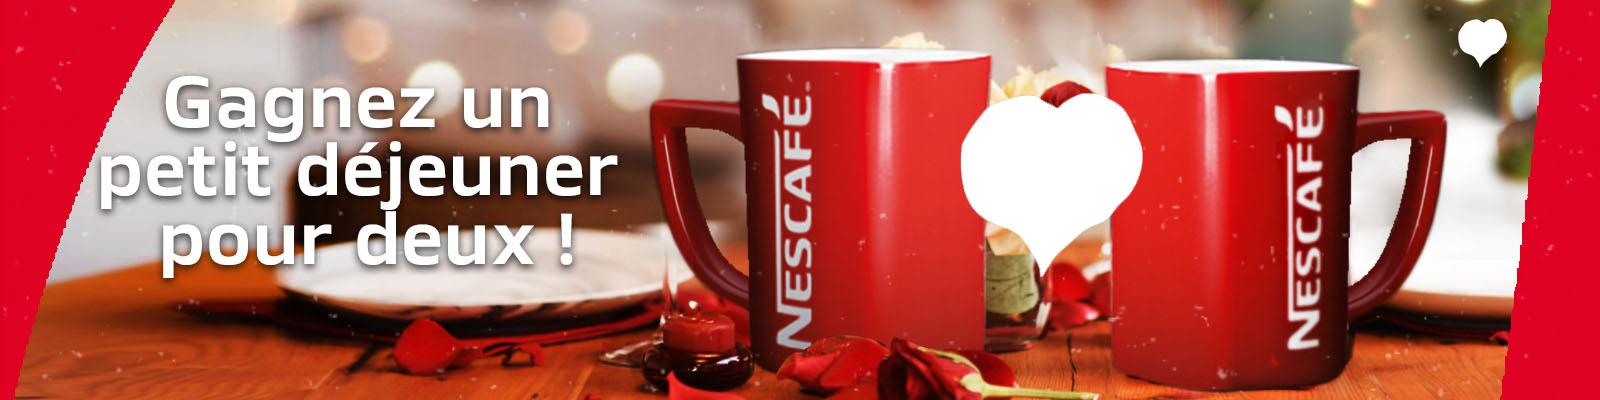 NescafeVal's Page BannerFR